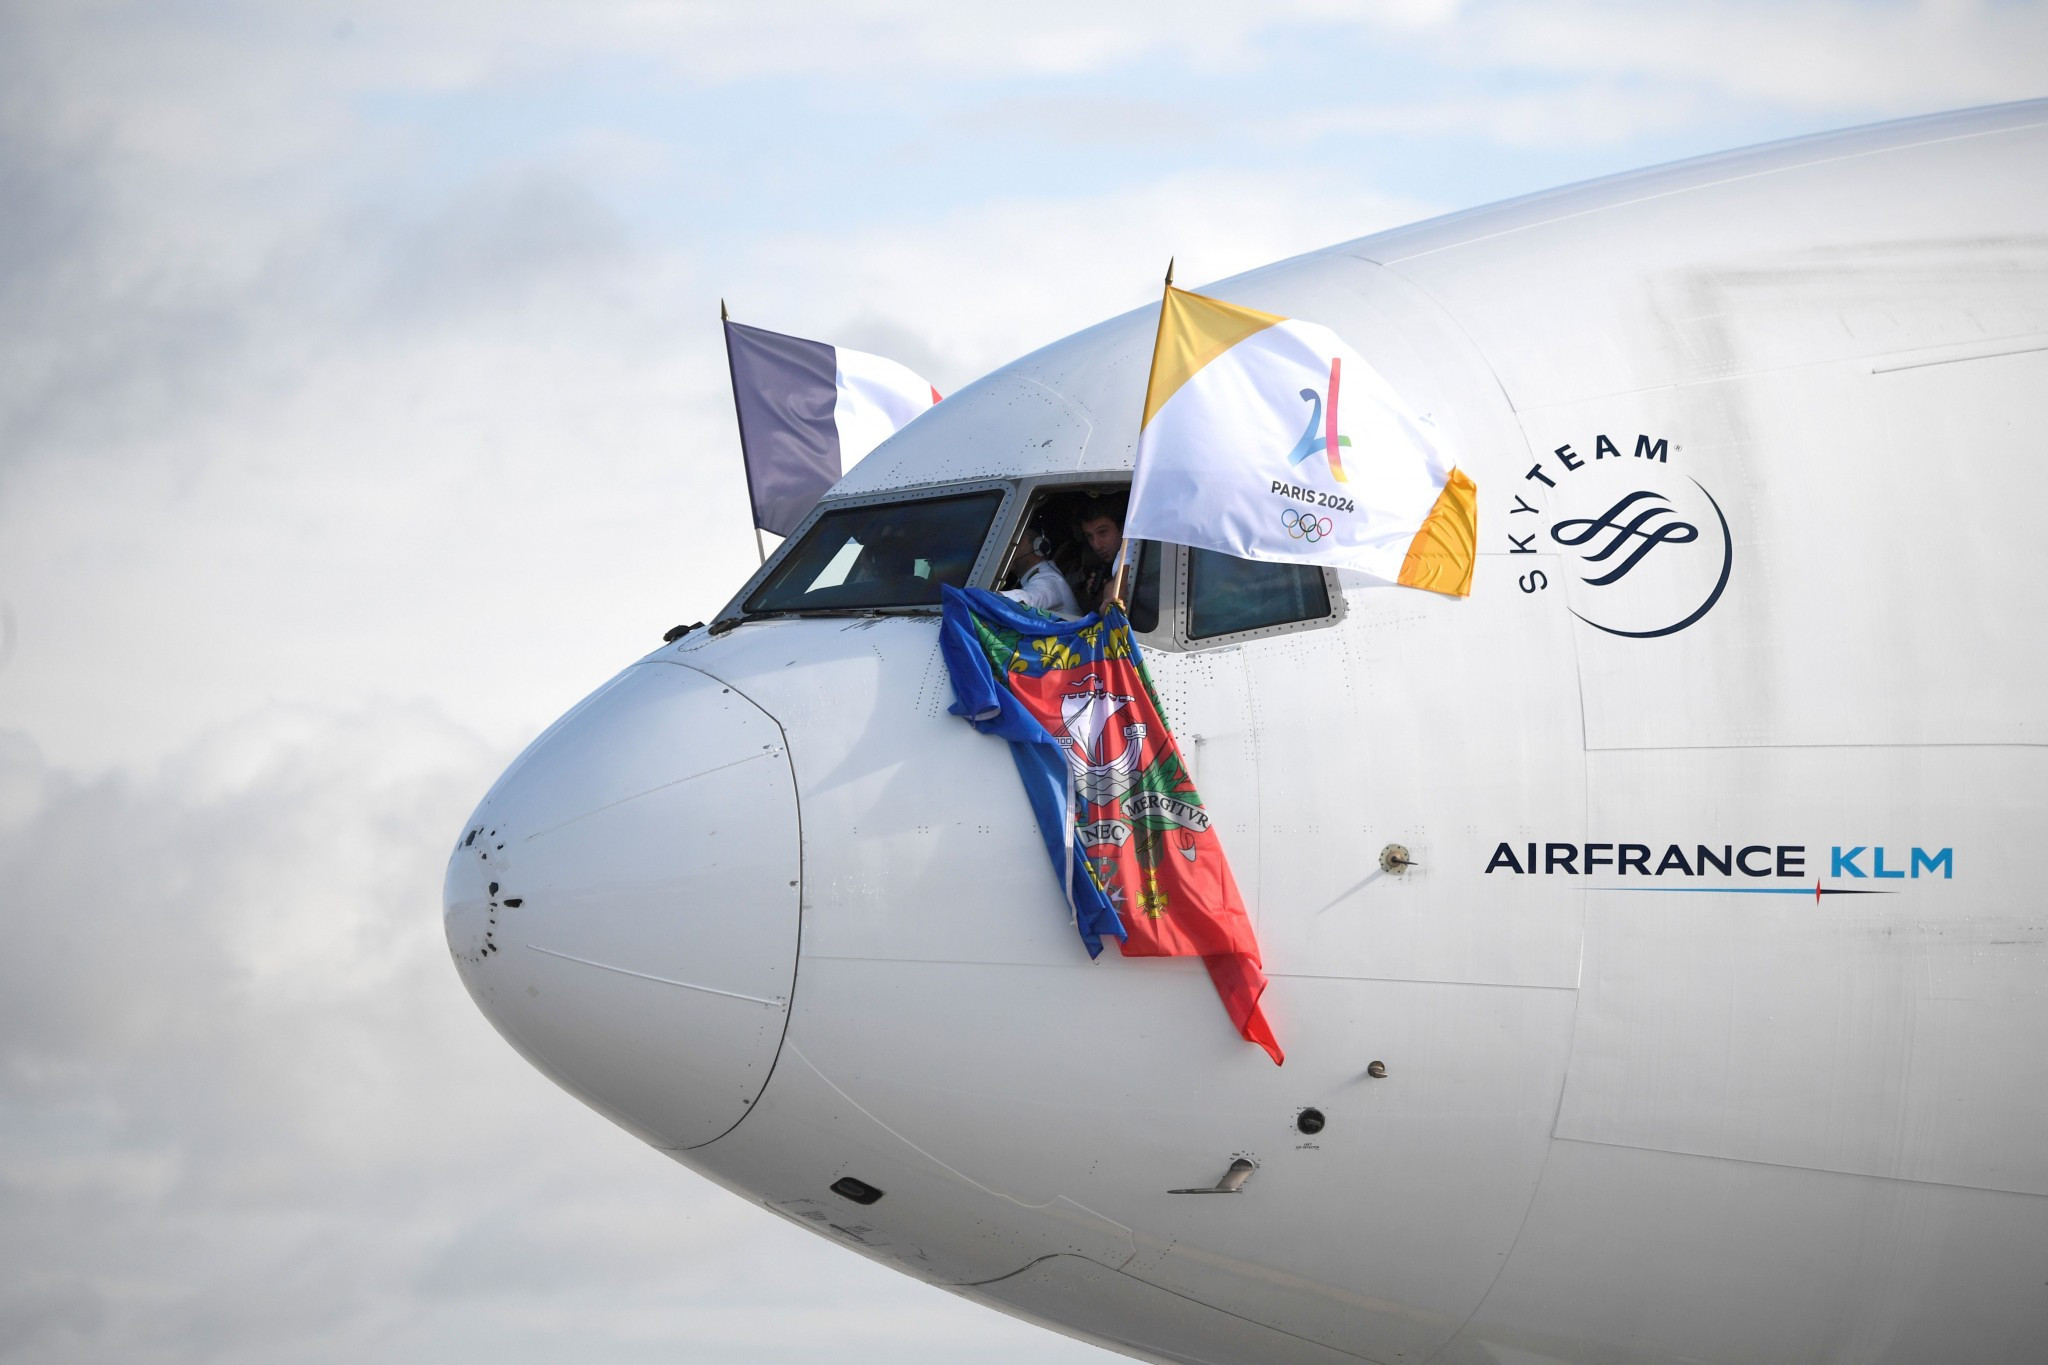 Paris 2024 arrived home to France in a special charter flight from Lima ©Getty Images